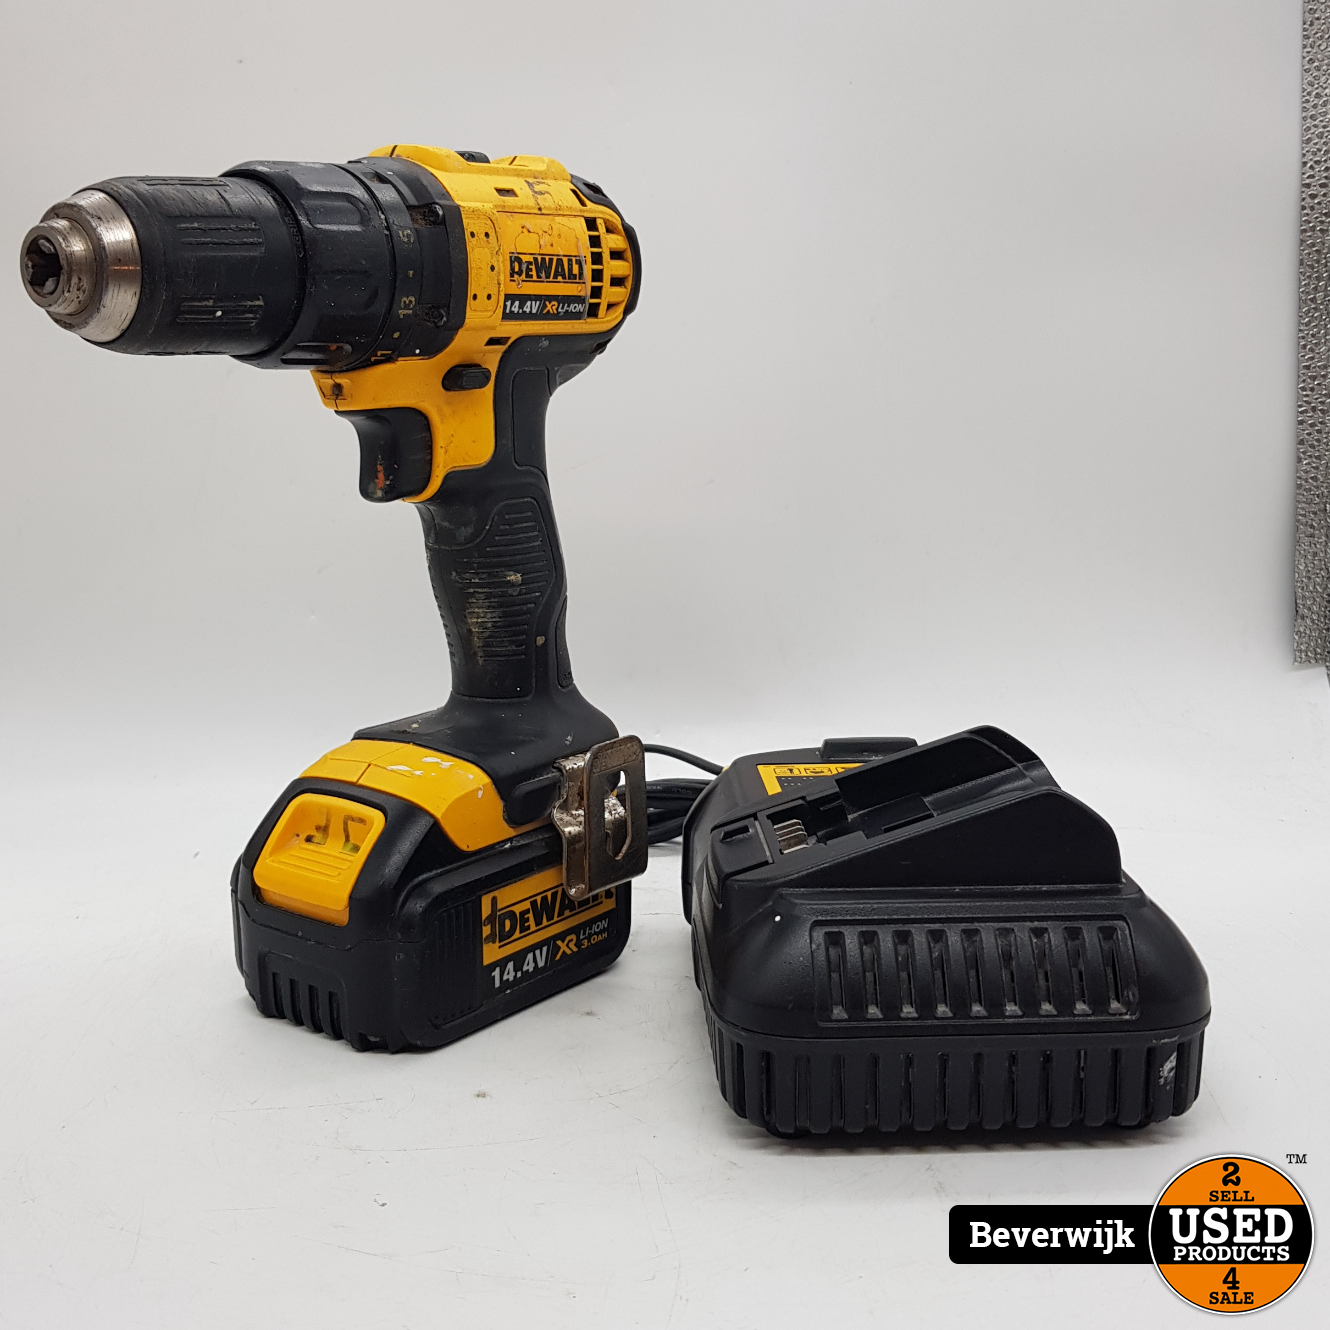 DeWalt DCD 730 Boormachine - In Goede Staat - Used Products